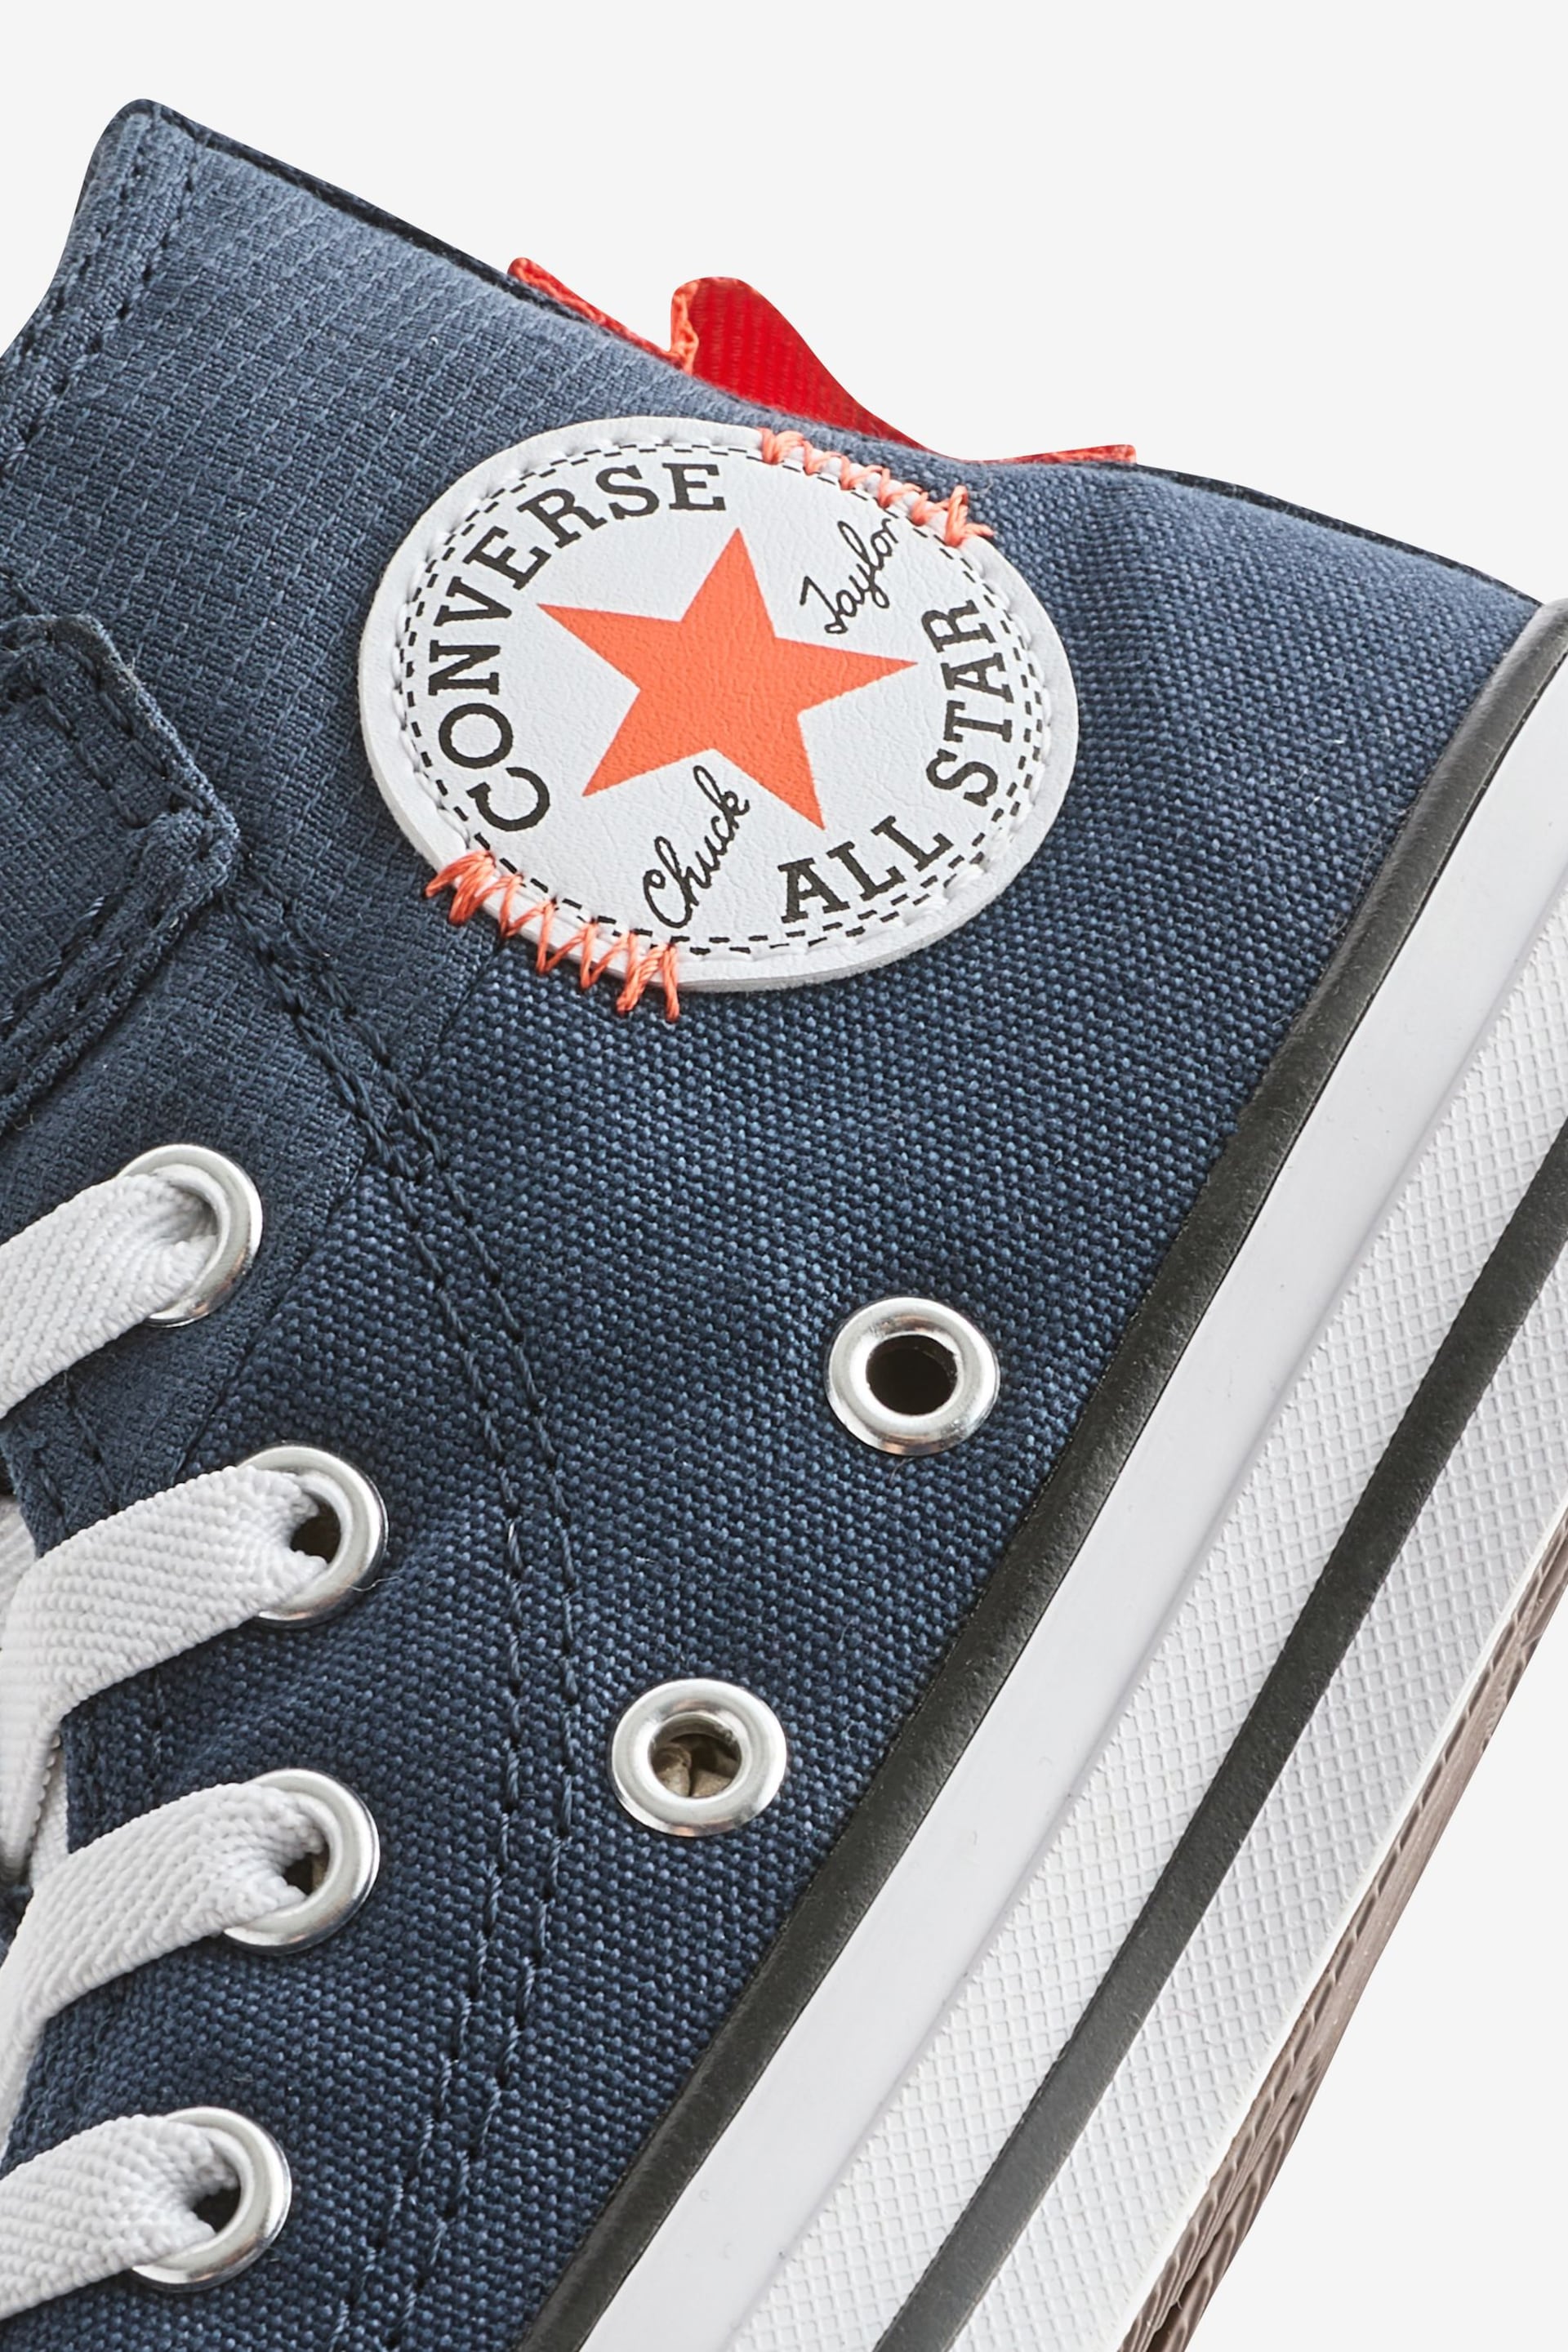 Converse Navy Chuck Taylor All Star 1V Junior Trainers - Image 8 of 9